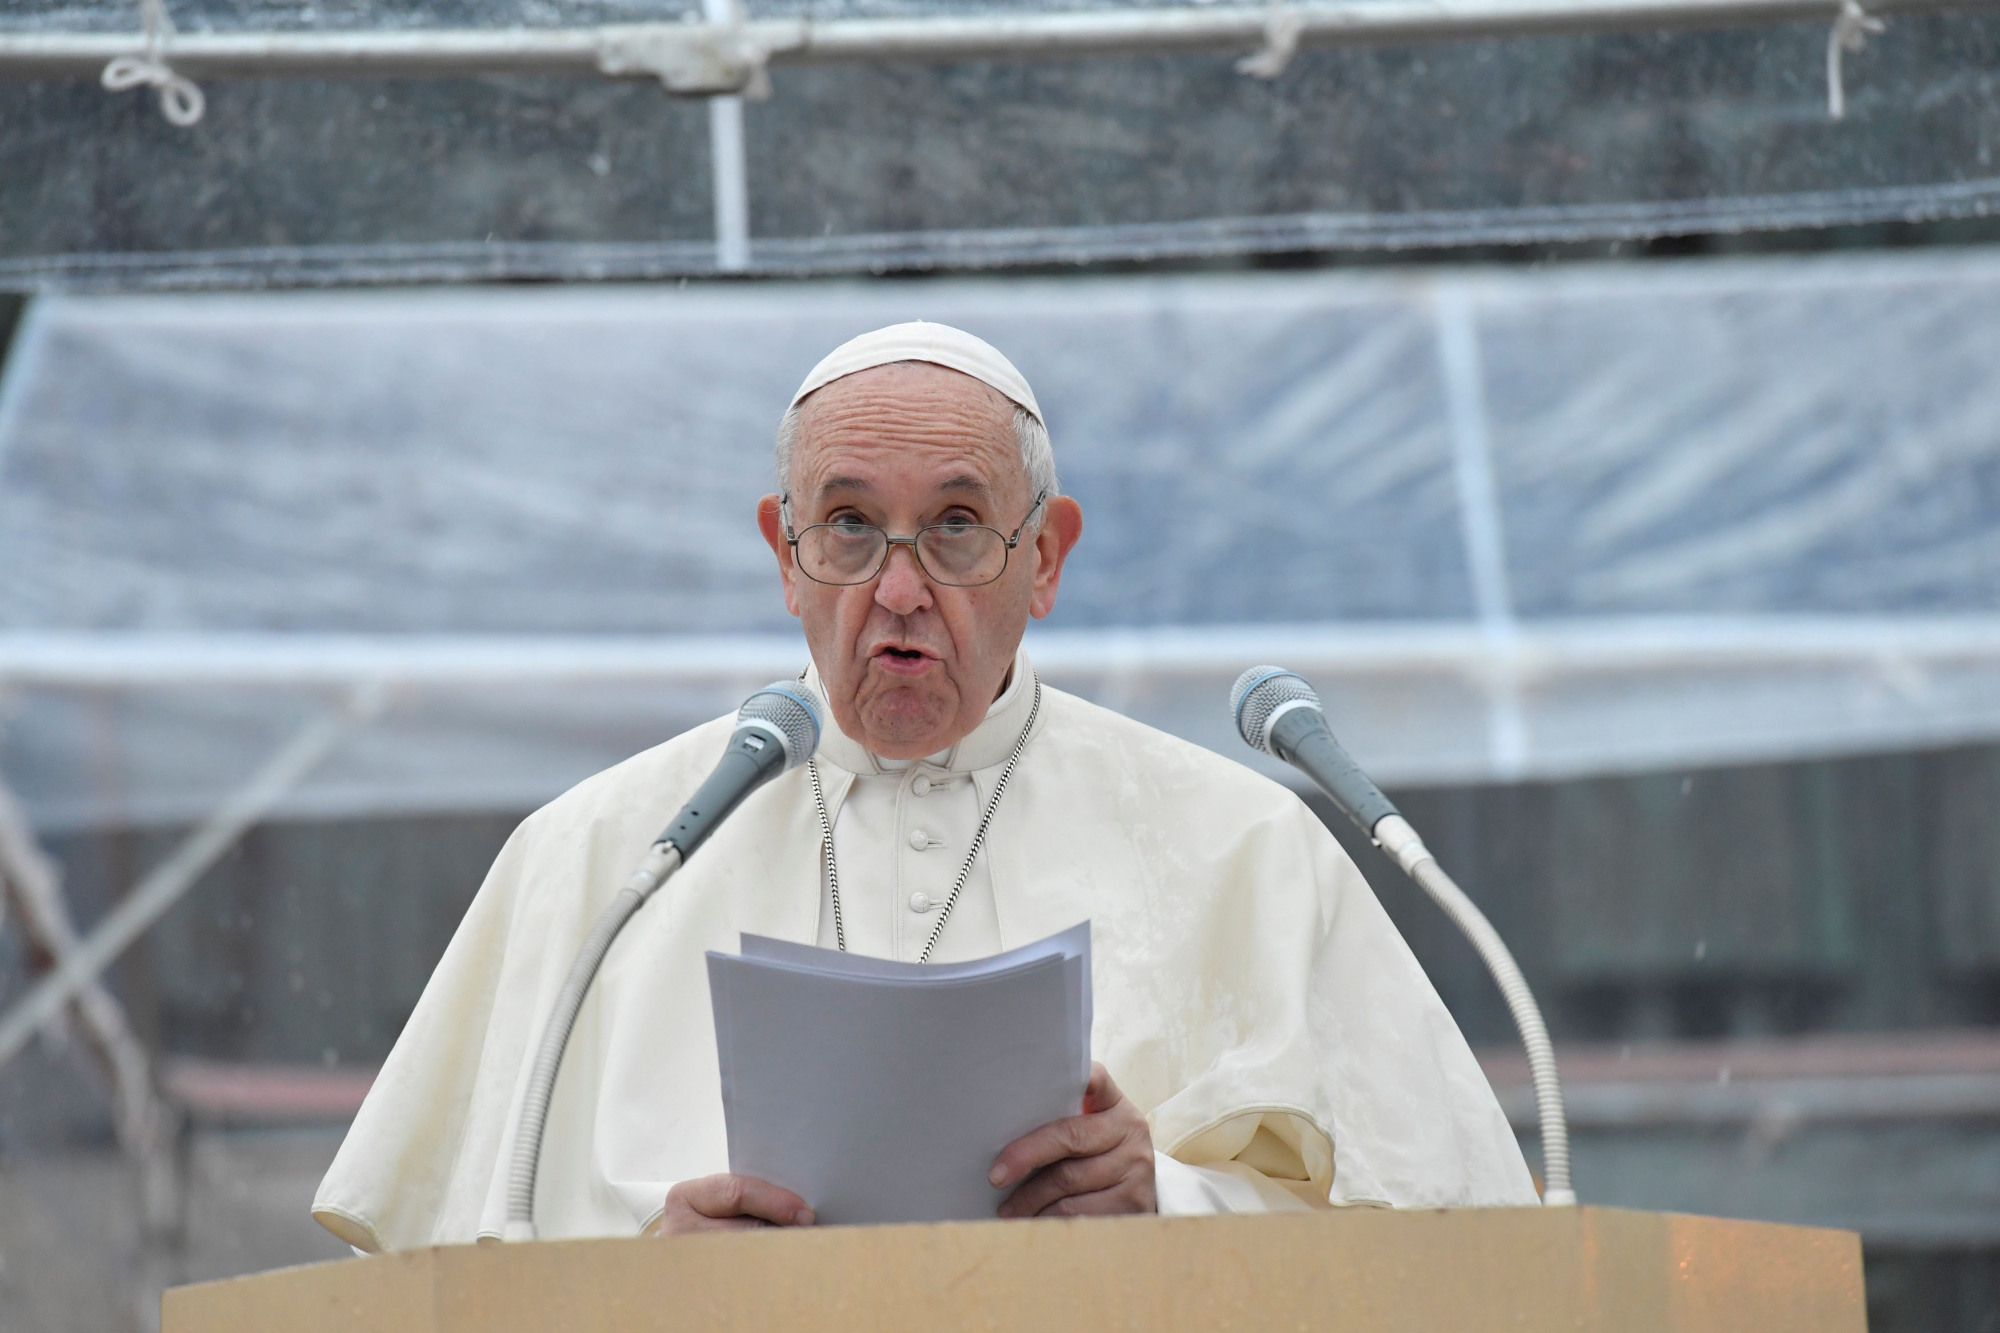 Pope Francis strongly criticized the concept of nuclear deterrence in a speech at the Atomic Bomb Hypocenter Park in Nagasaki on Sunday. | VIA REUTERS